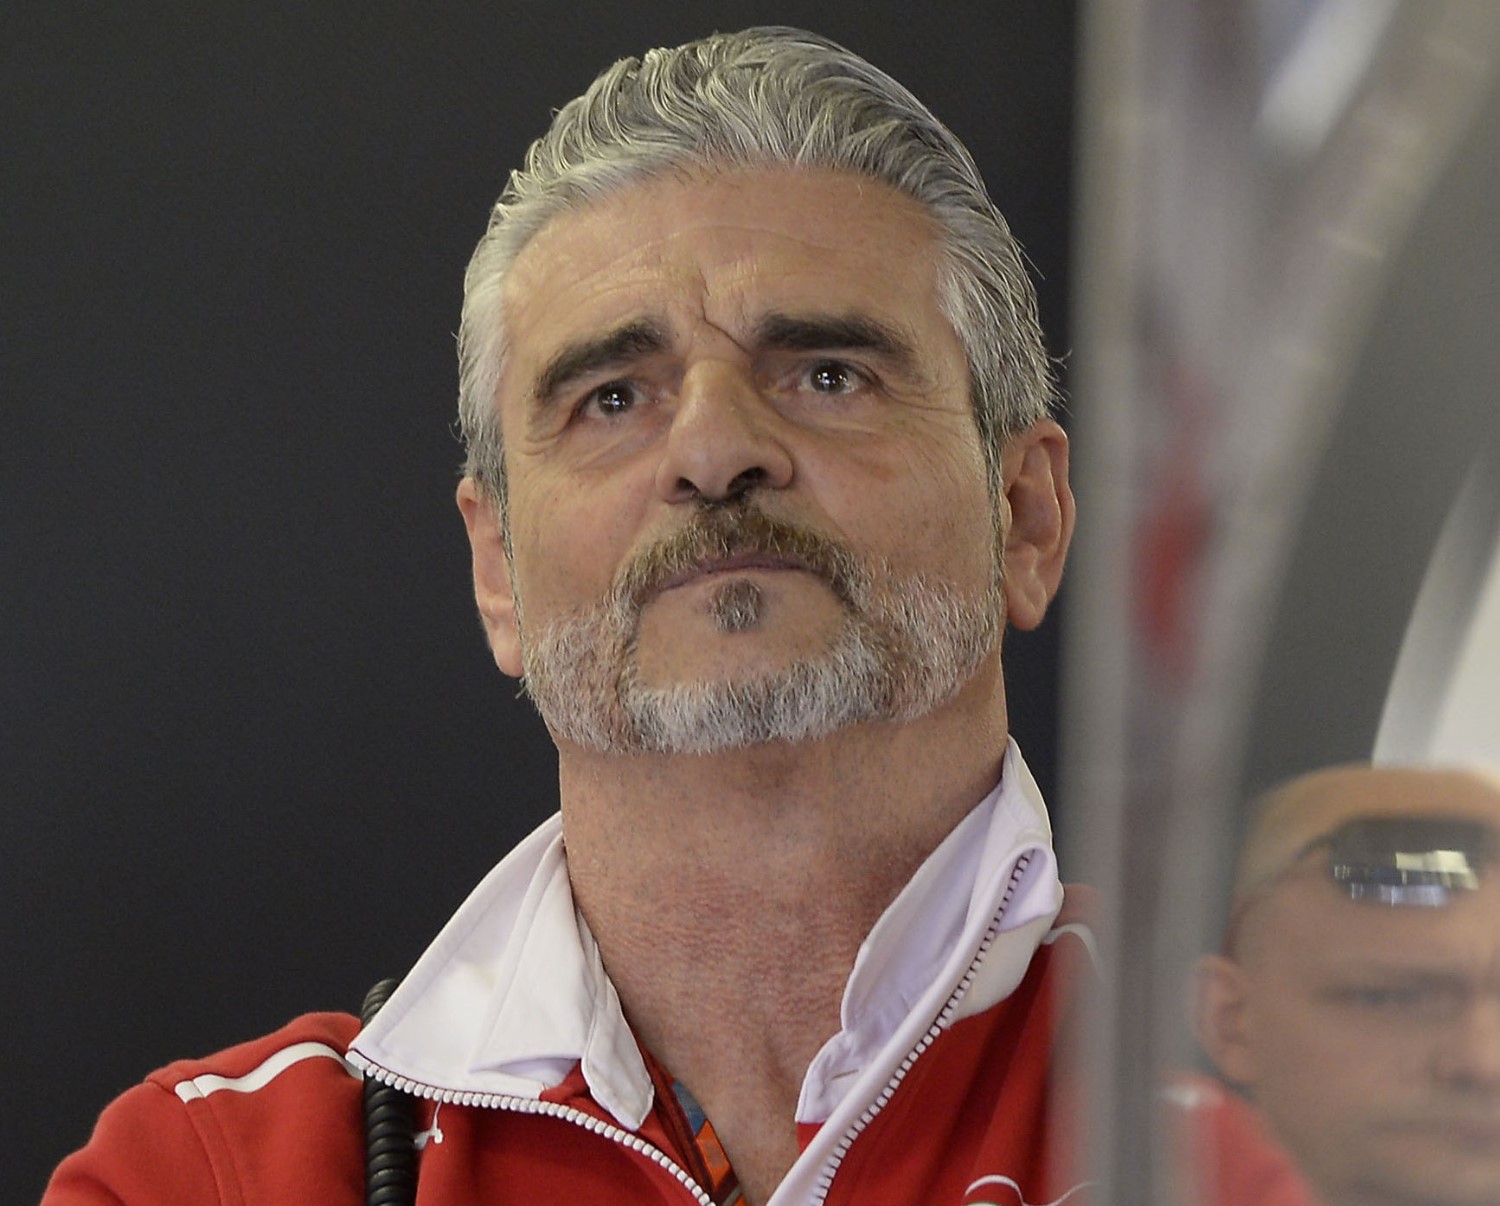 Arrivabene rolls eyes after hearing old man Ecclestone's comments